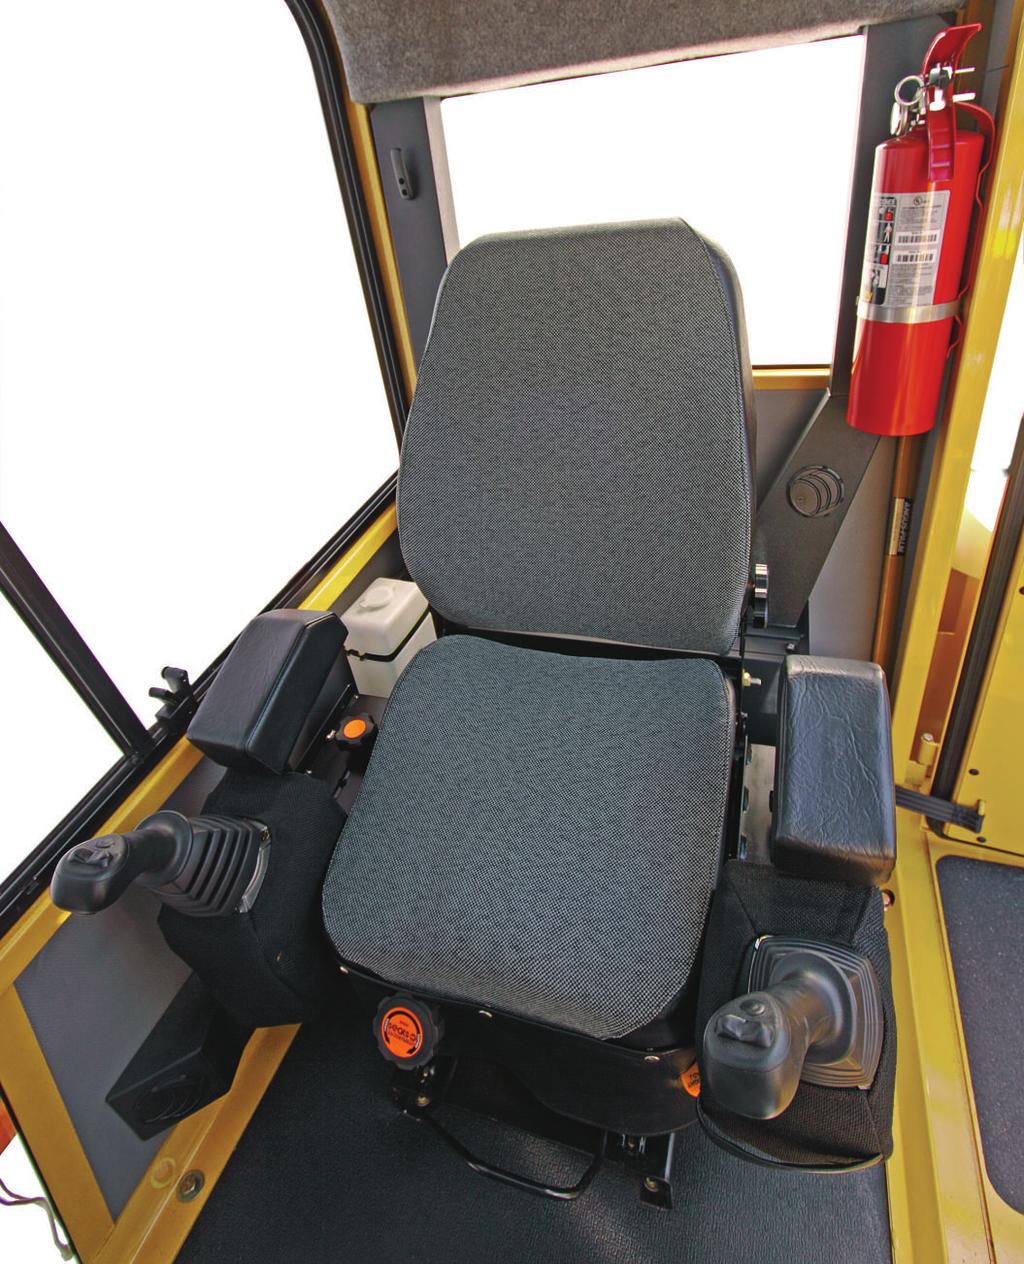 Operator Station Unprecedented visibility and comfort The operator station is designed with comfort in mind.